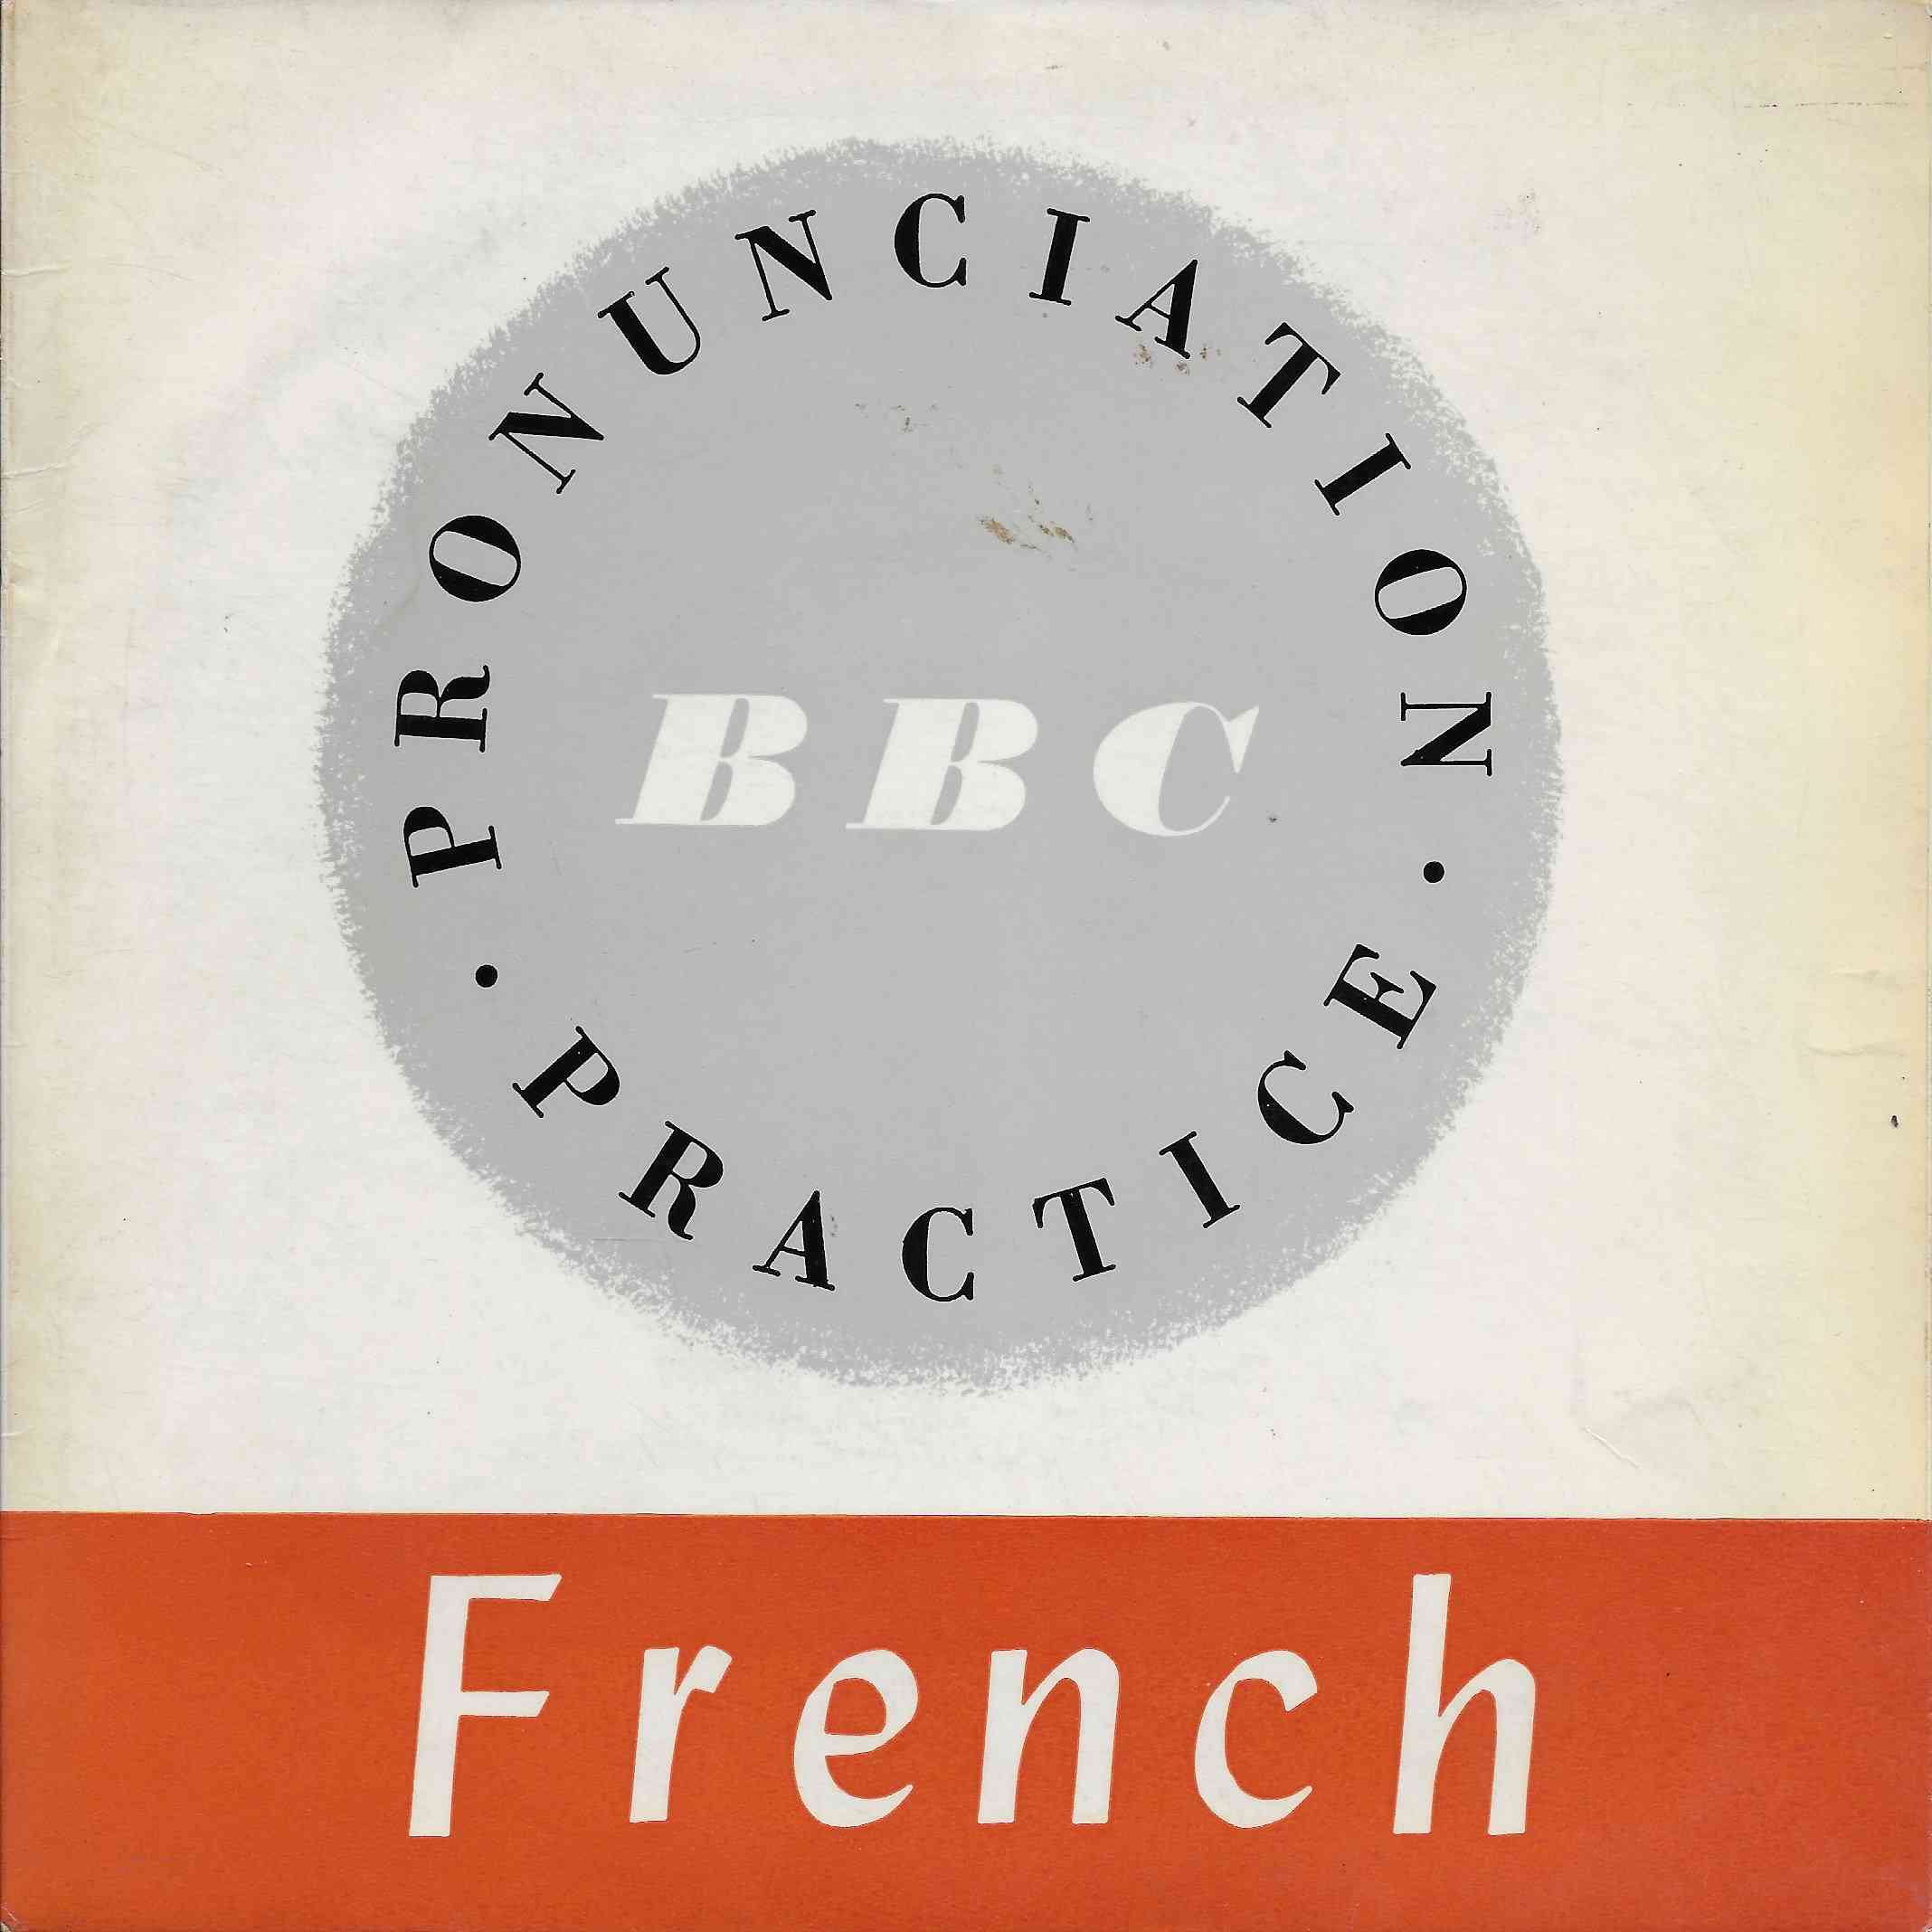 Picture of French by artist Elsie Ferguson from the BBC singles - Records and Tapes library